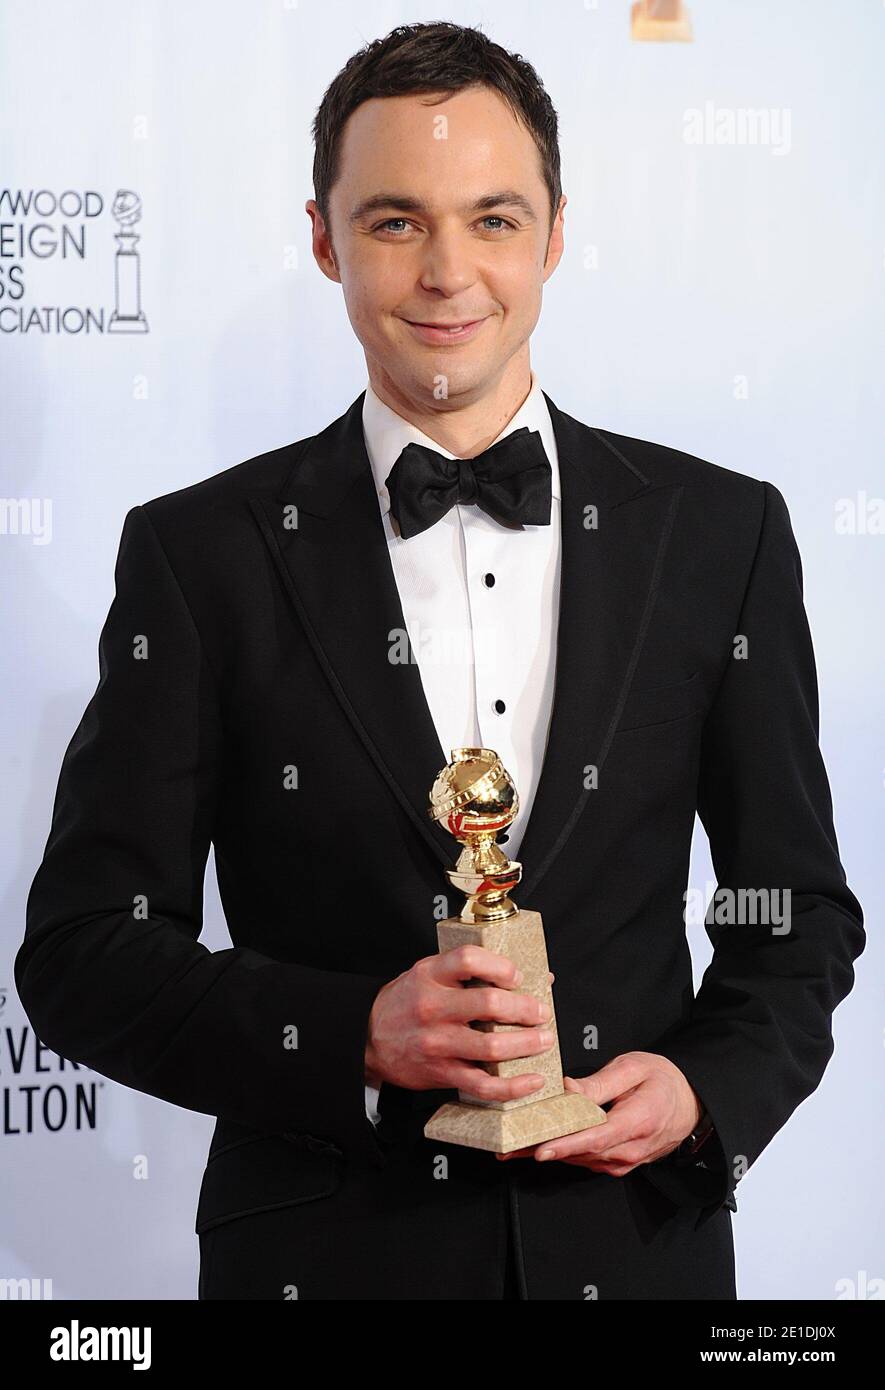 Jim Parsons with his award for Best Actor in a Television Series (Musical  or Comedy) for 'The Big Bang Theory', poses in the press room of the 68th  Golden Globe Awards ceremony,